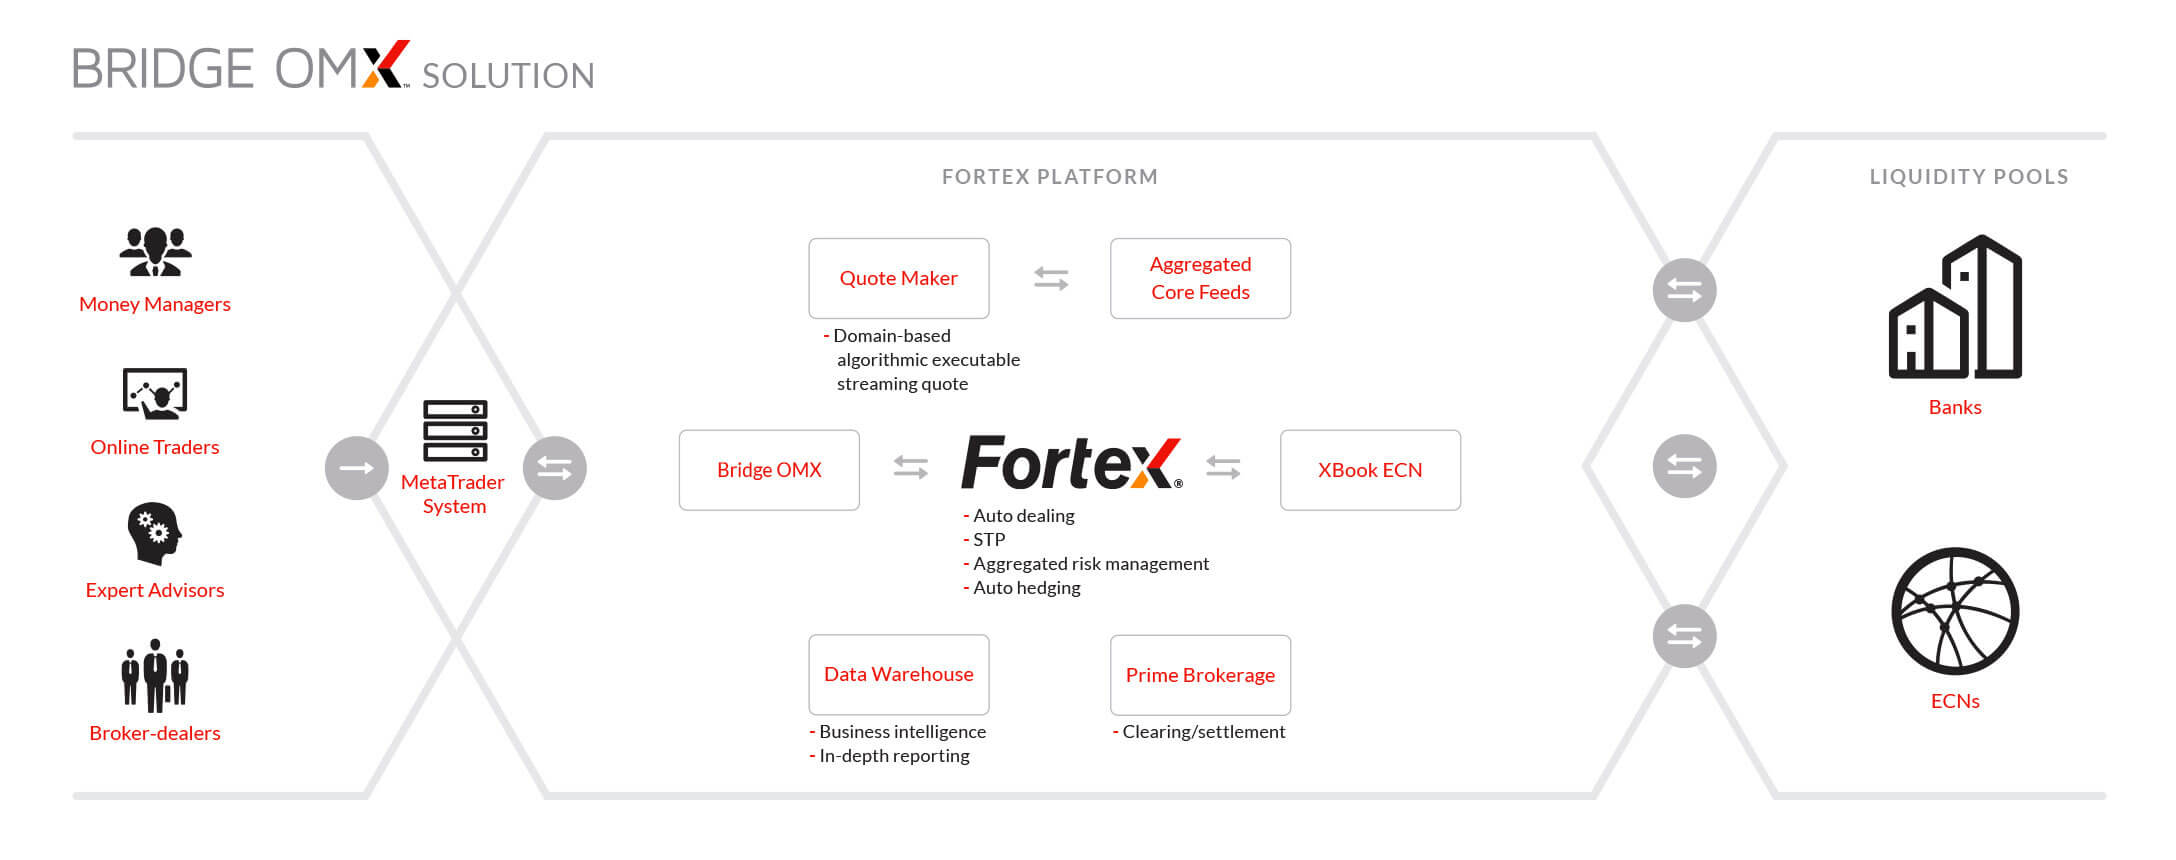 Fortex Bridge OMX solution transformed FX trading for tens of thousands of MetaTrader users and was the driving force behind the success of MT4 powerhouses. 